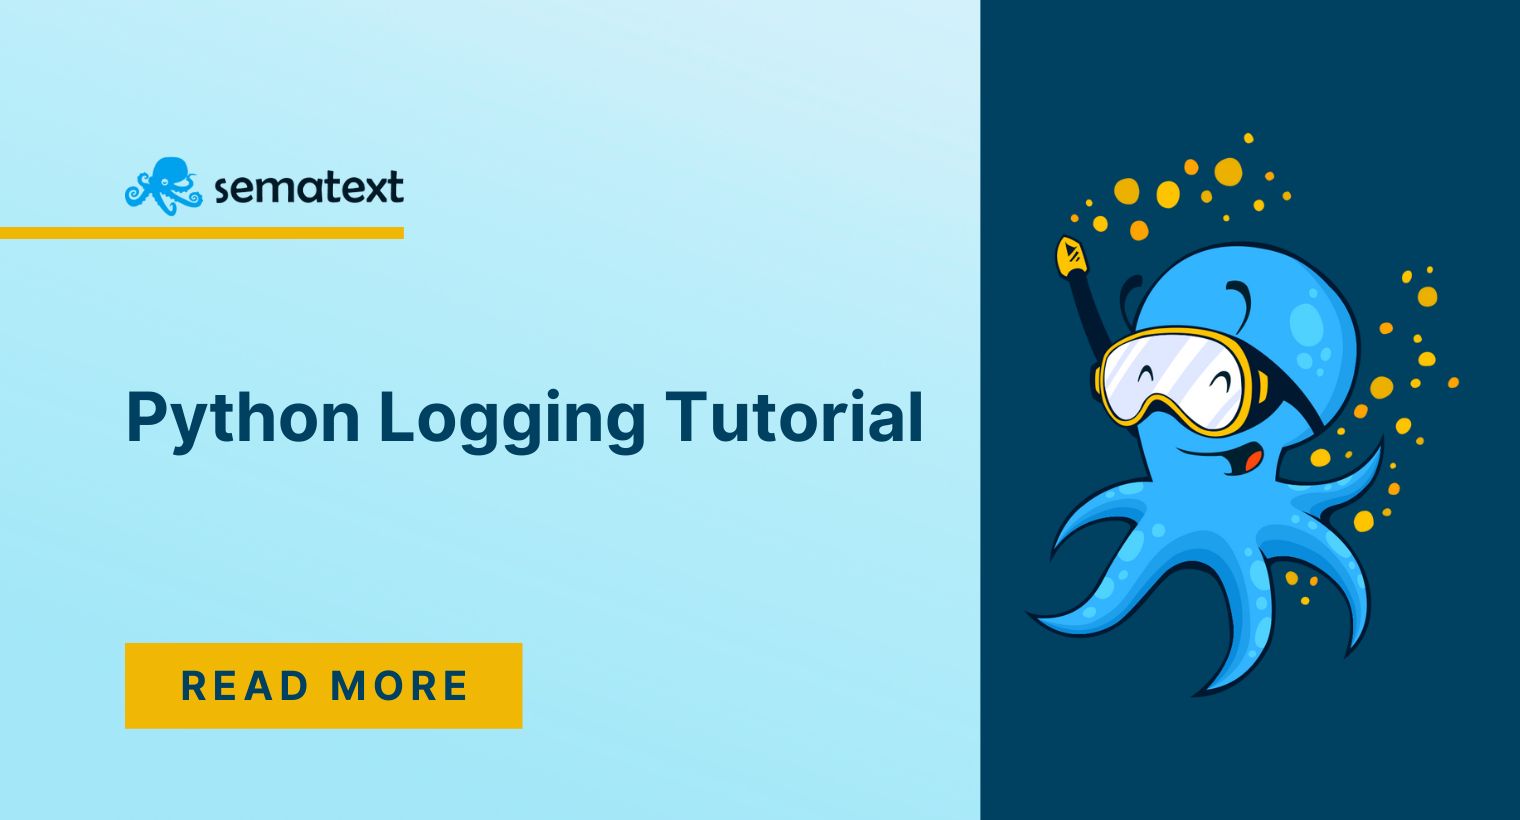 Python Logging Tutorial: How-To, Basic Examples & Best Practices